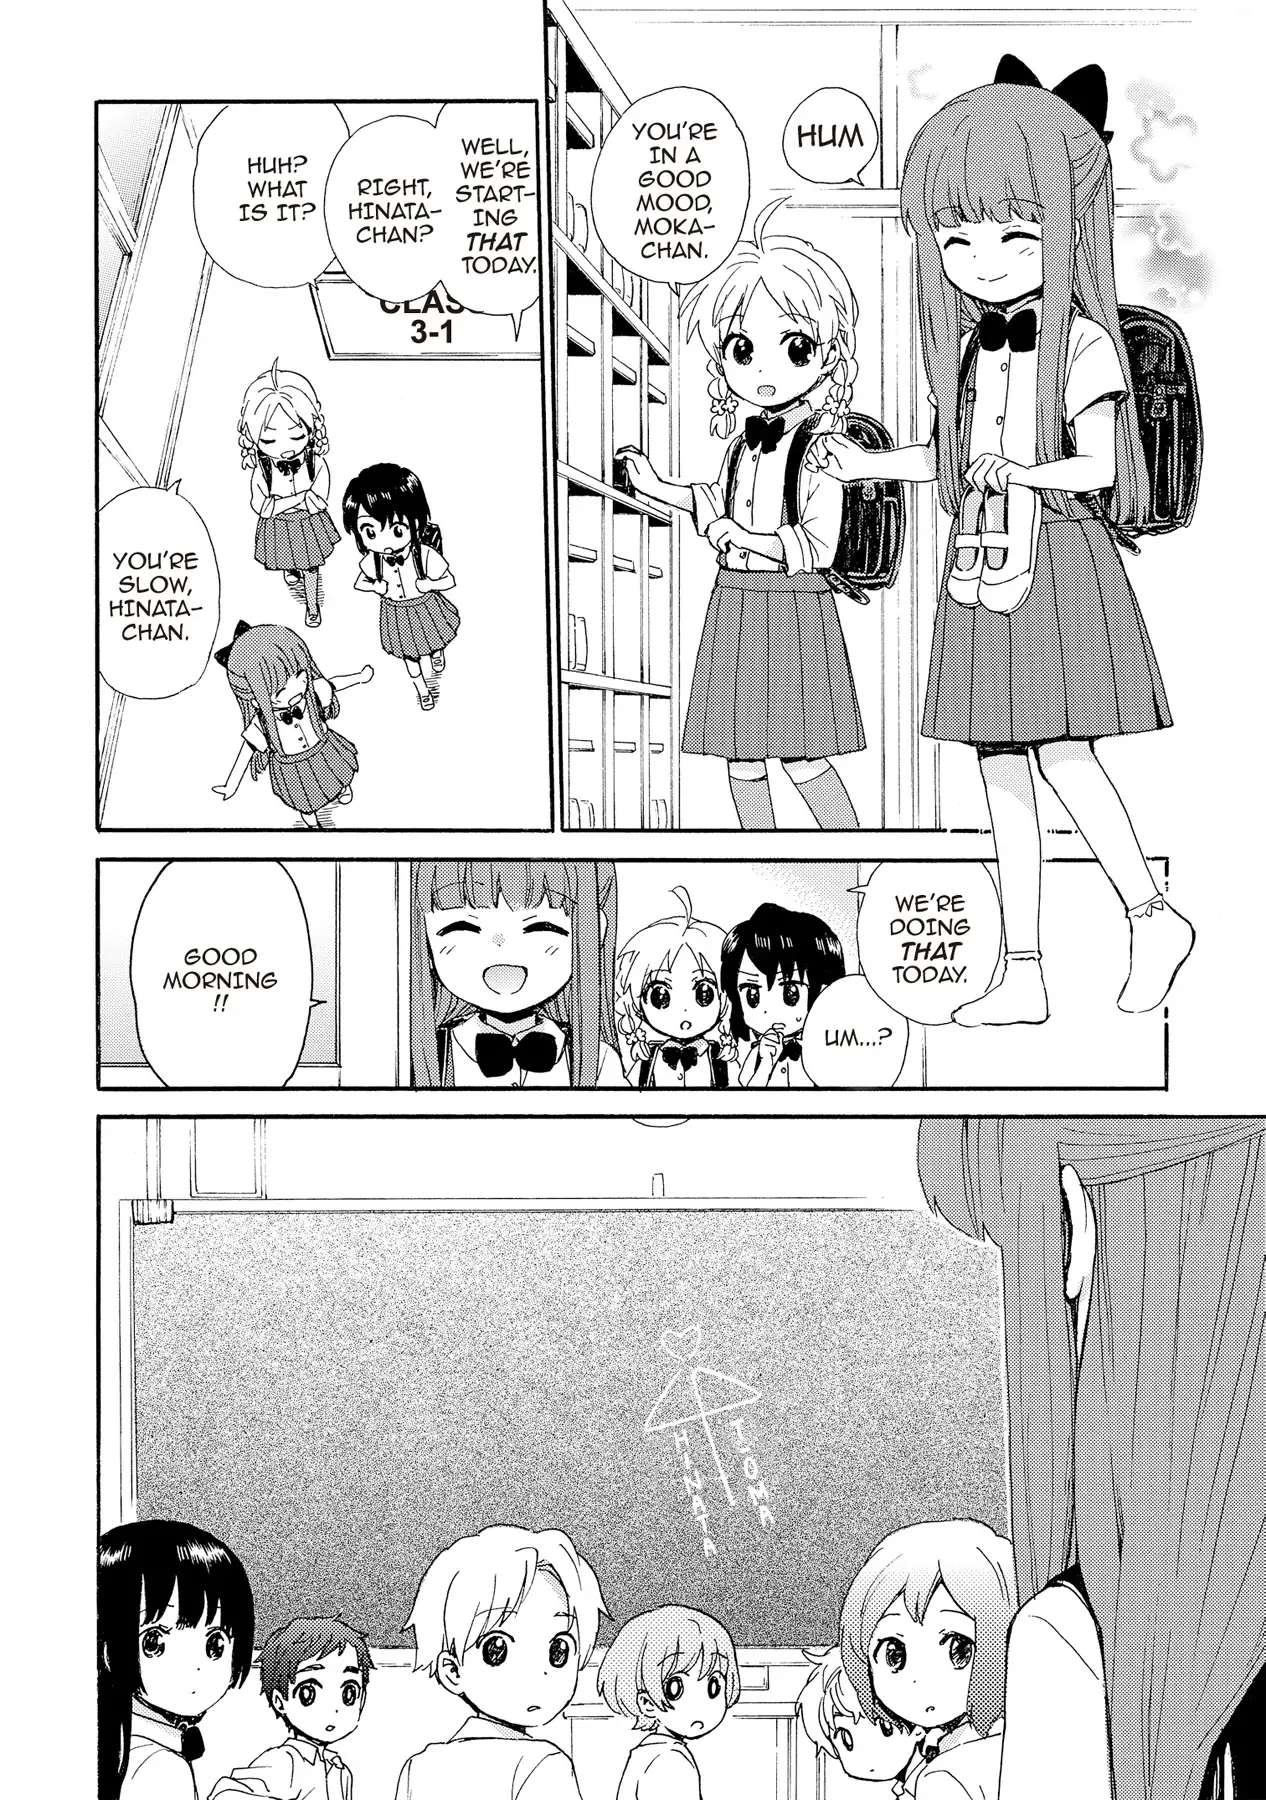 The Cute Little Granny Girl Hinata-chan - chapter 89 - #3